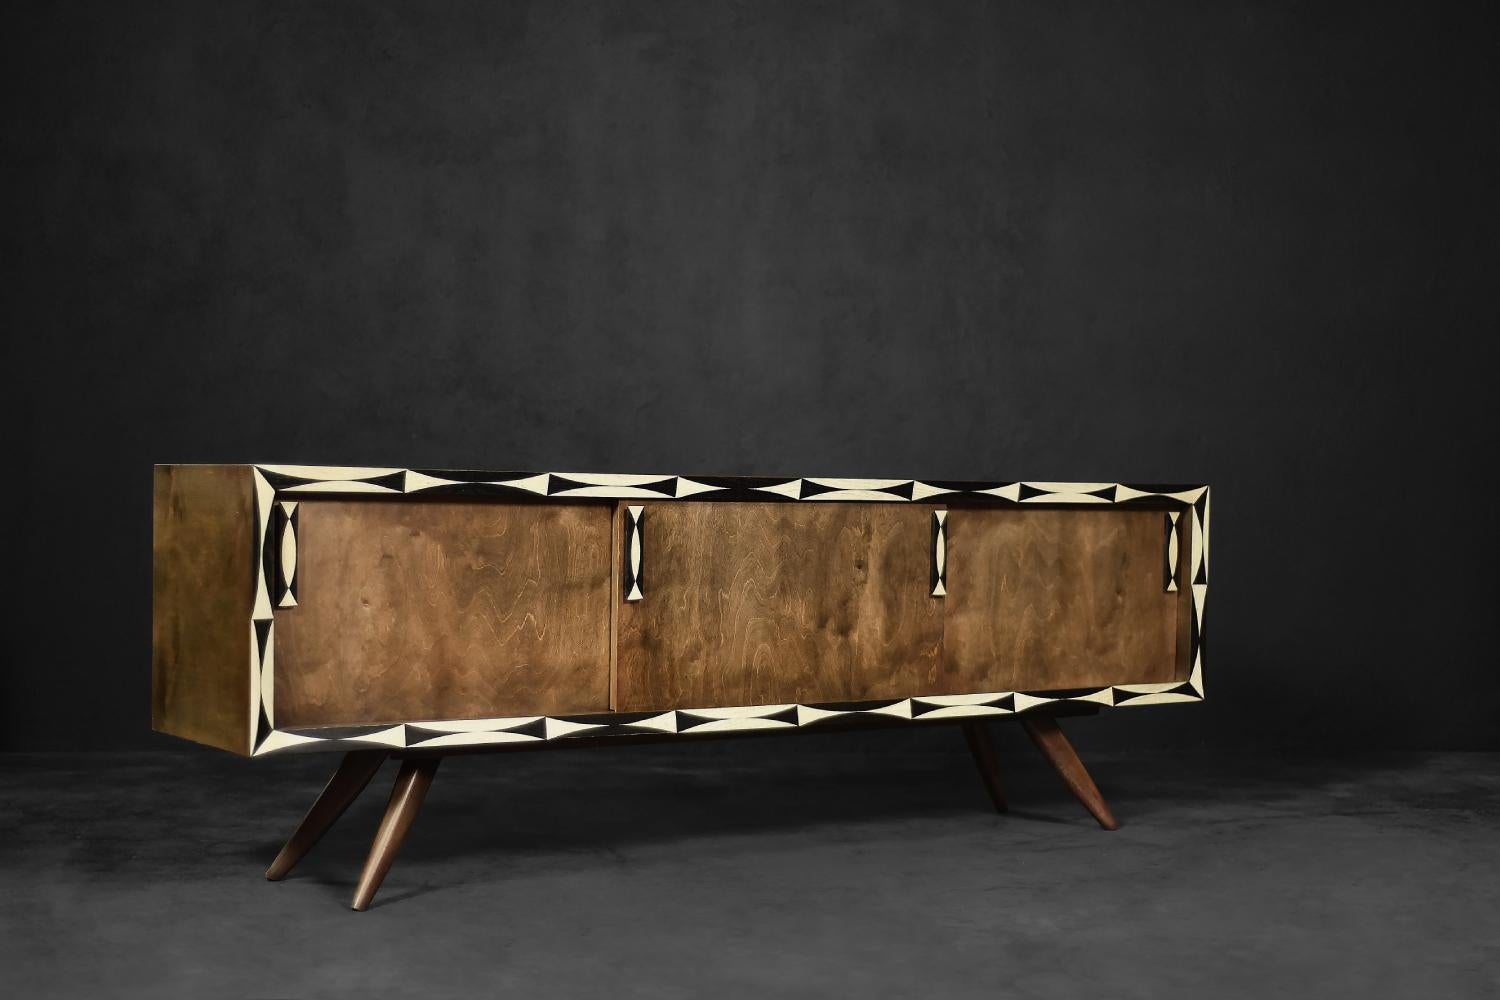 This modernist sideboard was made in Scandinavia during the 1960s. It is made of high-quality birch wood with a strong, irregular grain in a warm shade of brown. The sideboard has three sliding doors. Inside there are shelves and a capacious space.